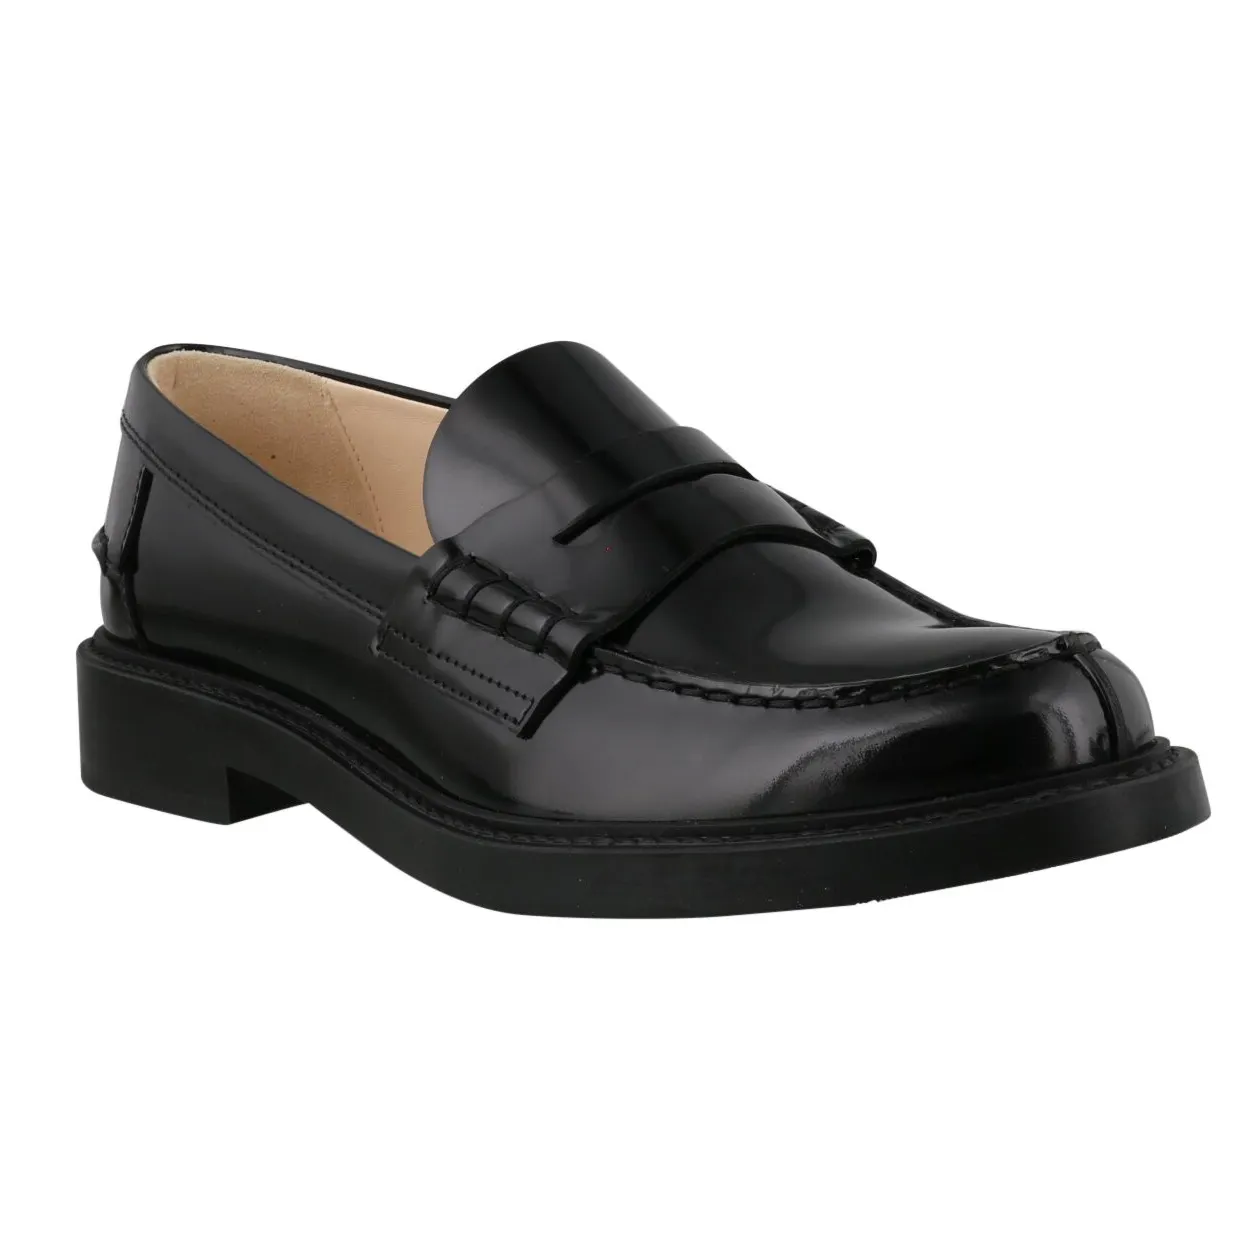 OEM luxury patent leather loafers flat high quality women shoes